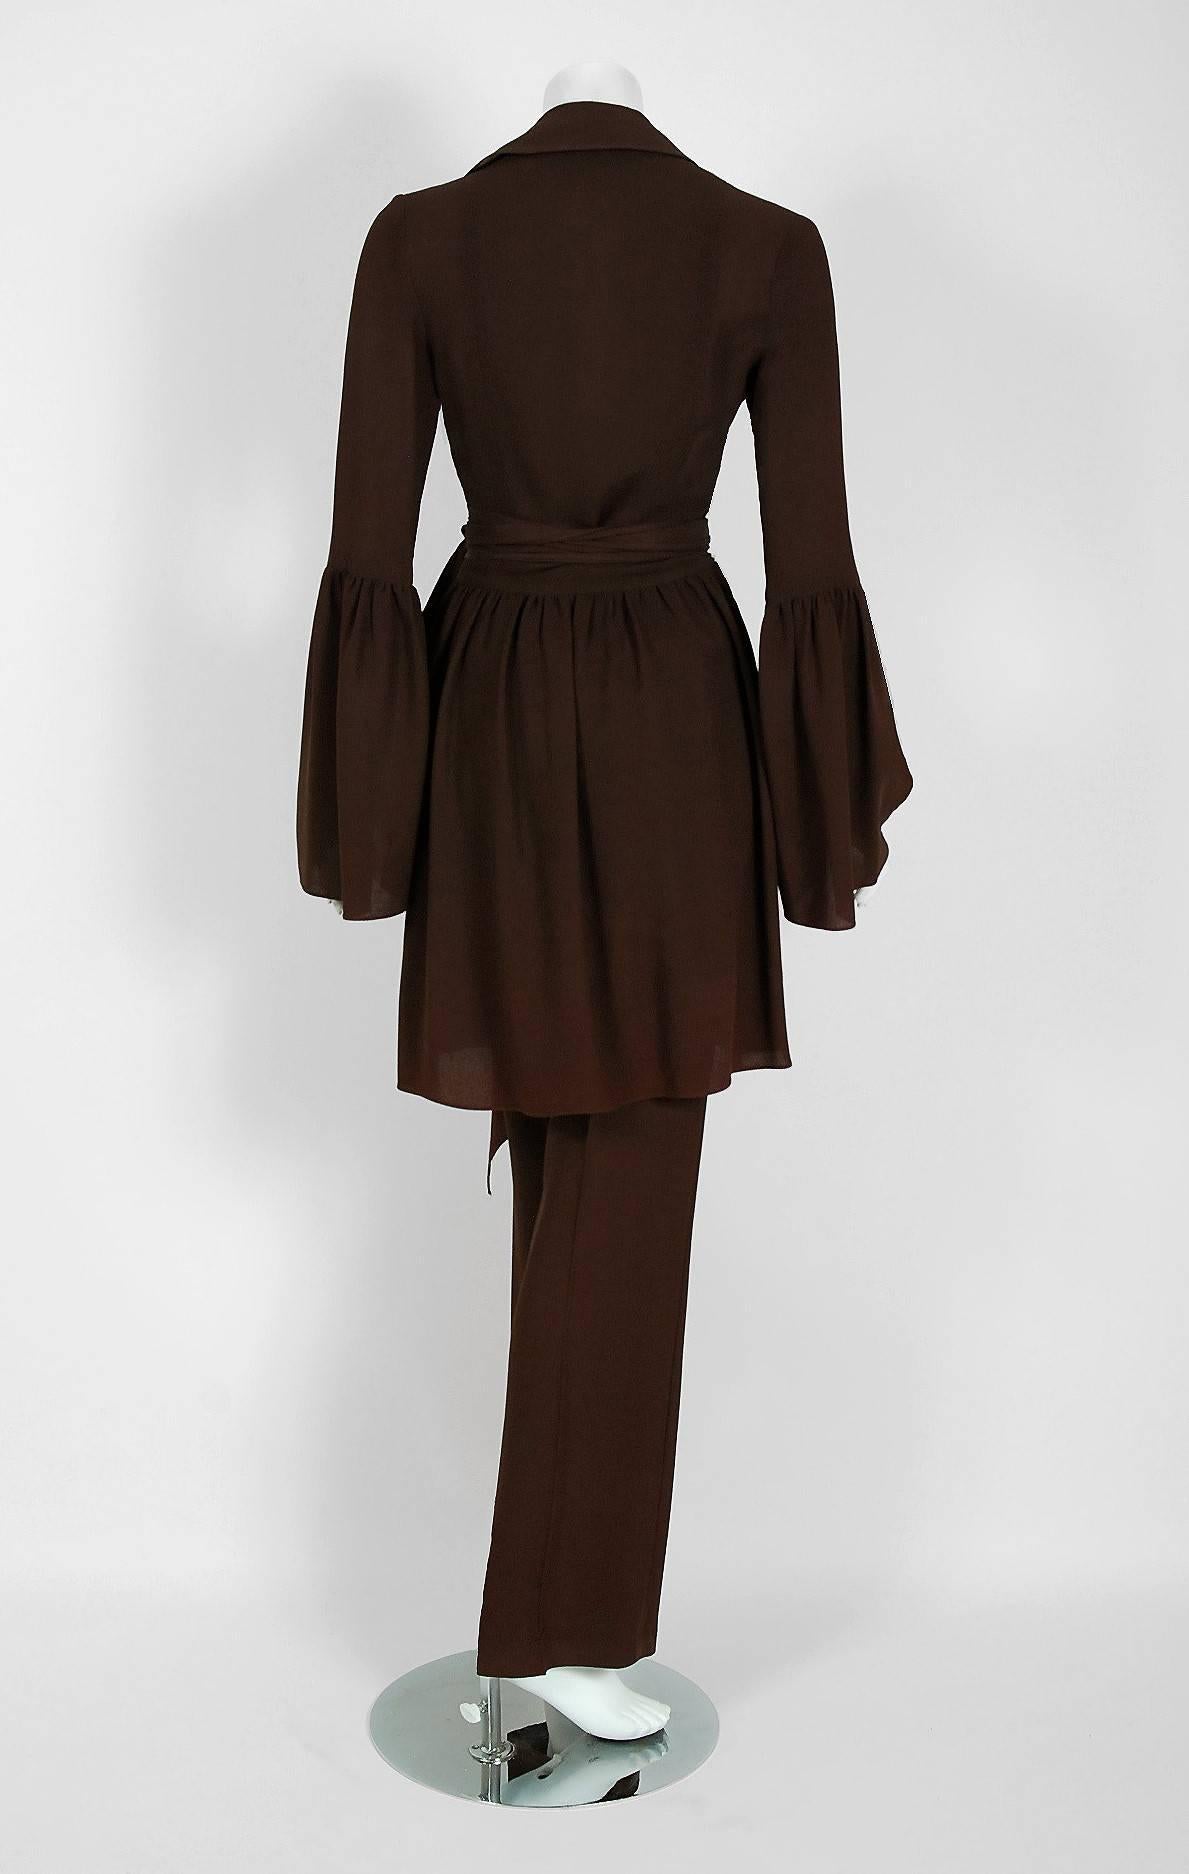 1971 Ossie Clark Brown Moss-Crepe & Satin Bell-Sleeve Plunge Dress Pant Suit 1